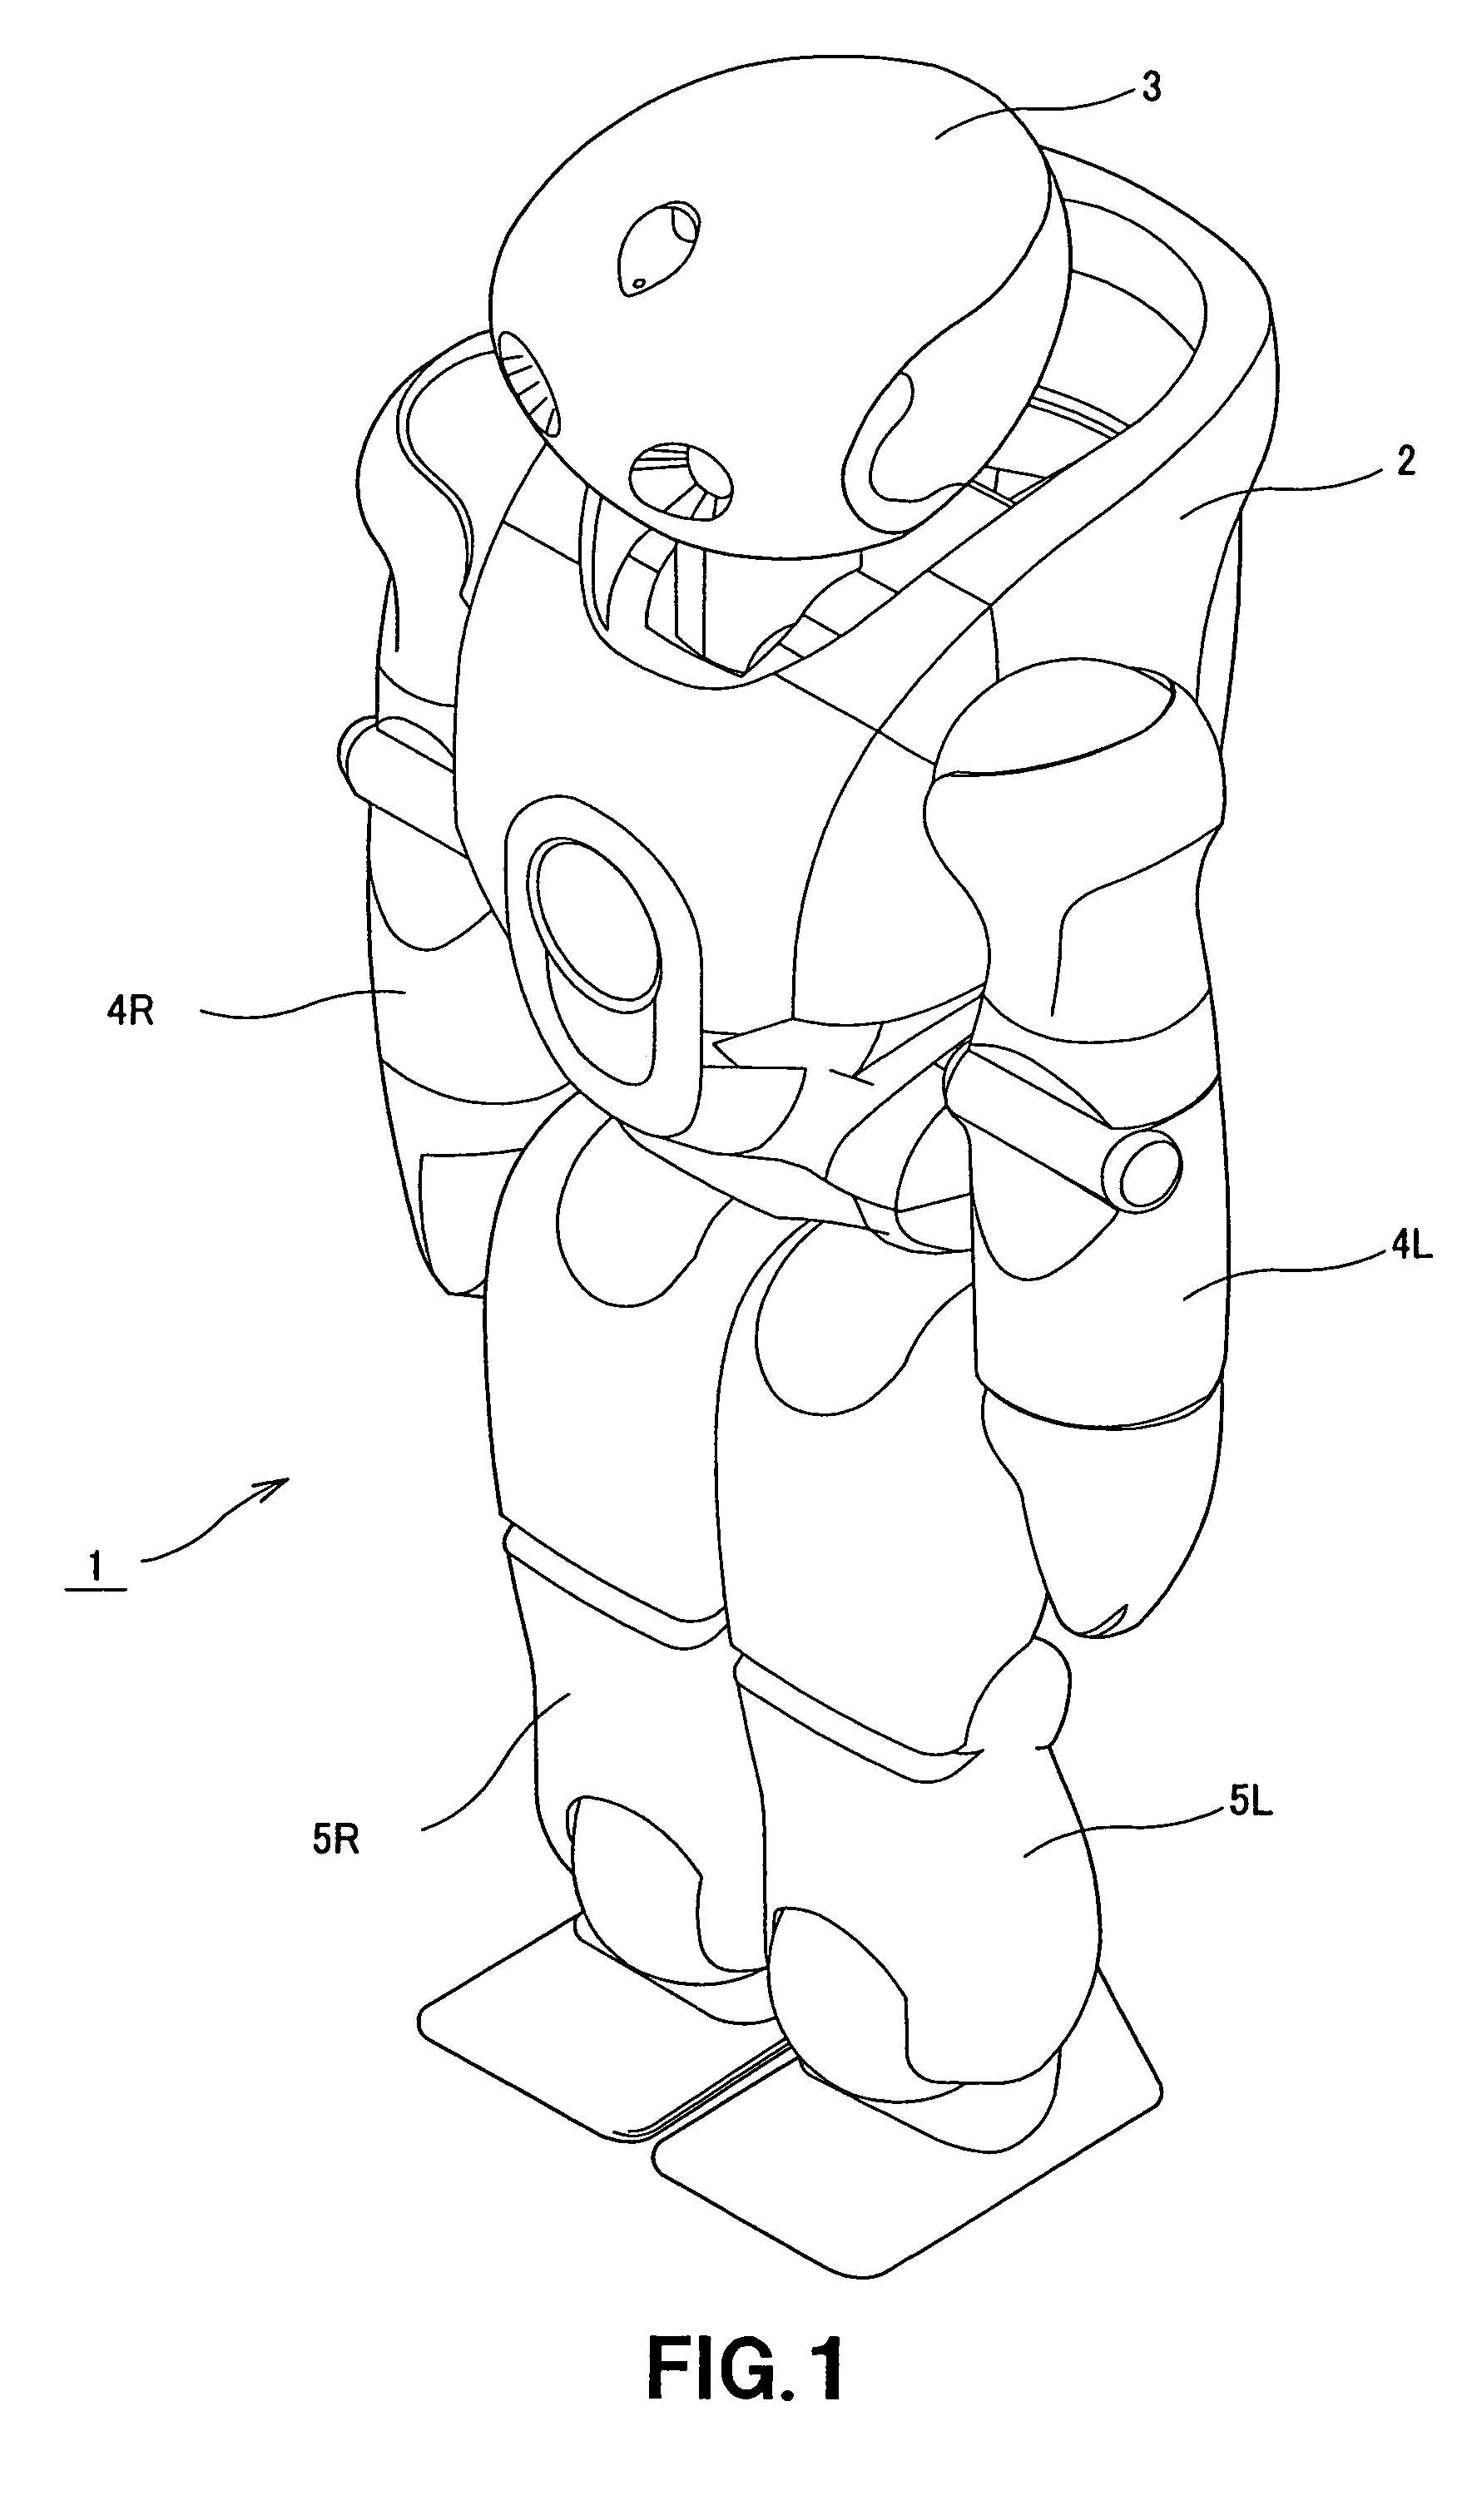 Robot behavior control based on current and predictive internal, external condition and states with levels of activations